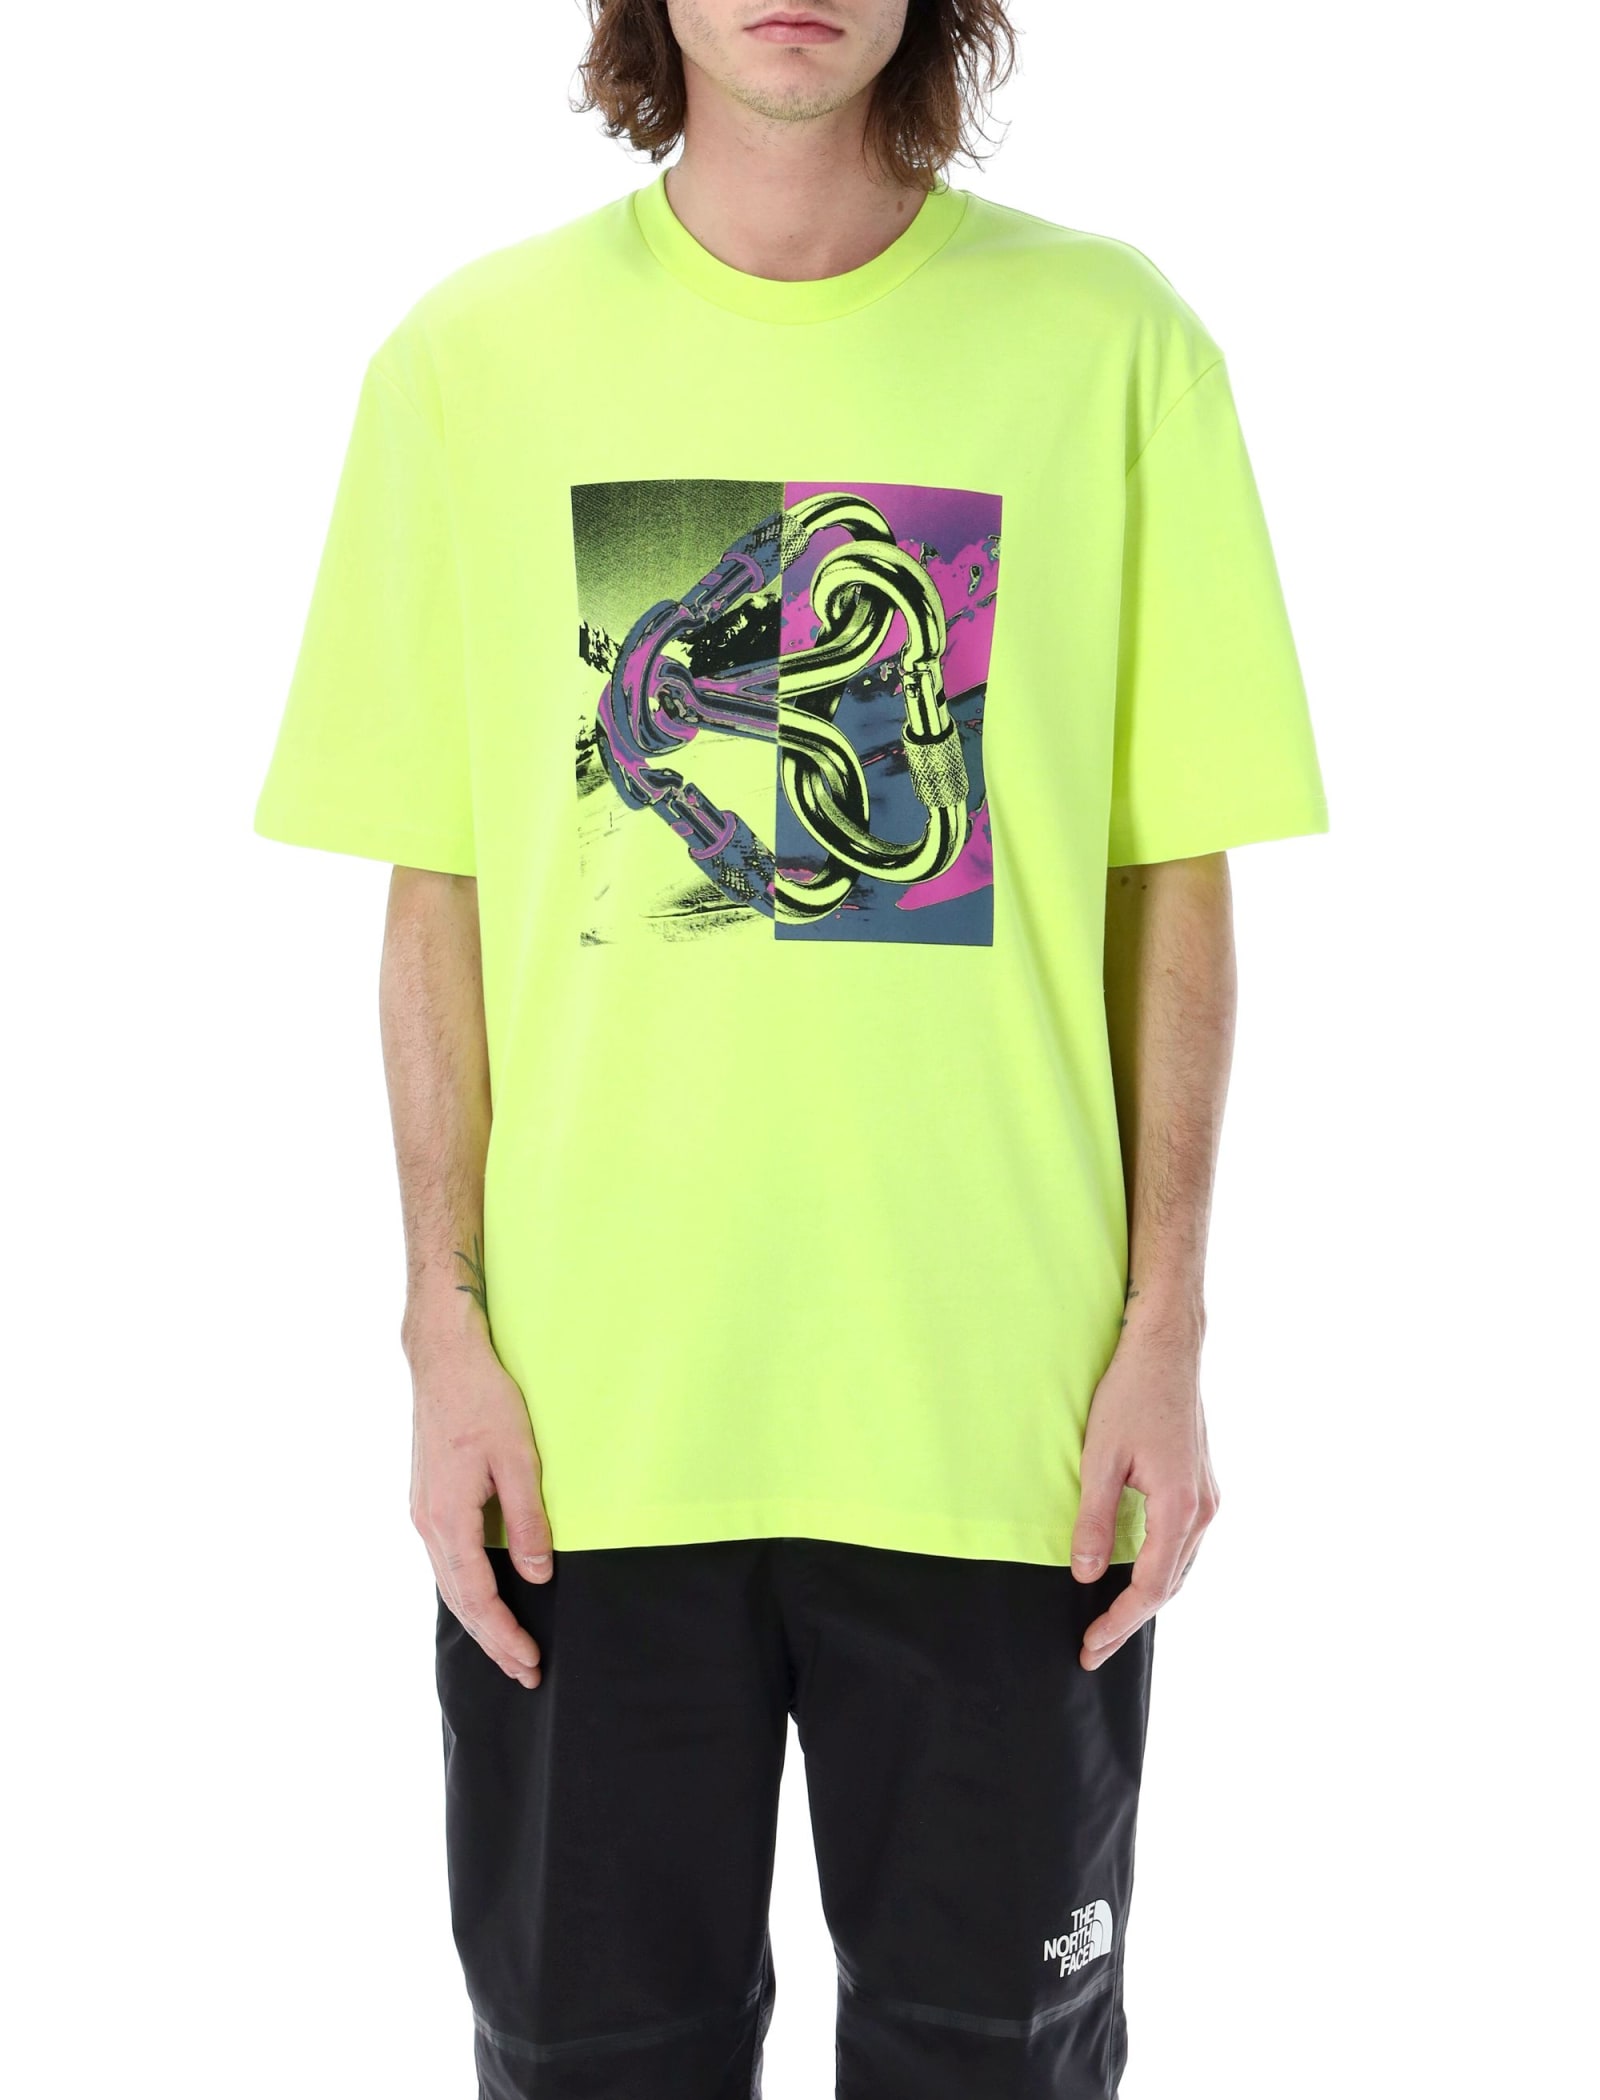 THE NORTH FACE GRAPHIC T-SHIRT